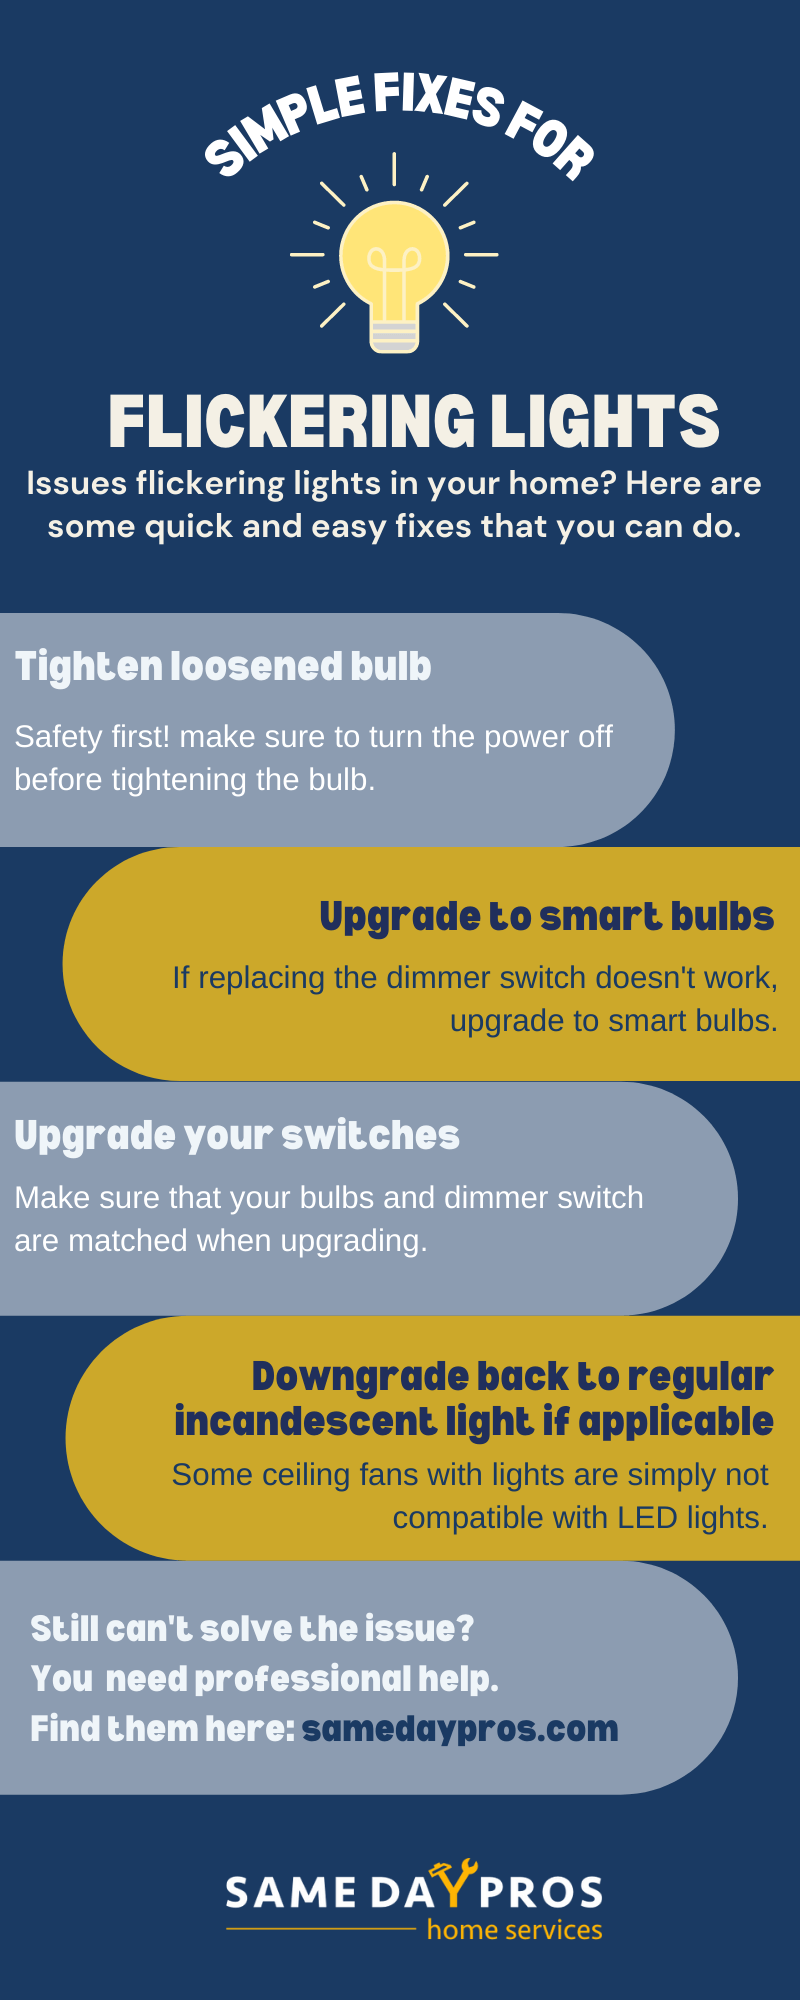 Simple Fixes for Flickering Lights